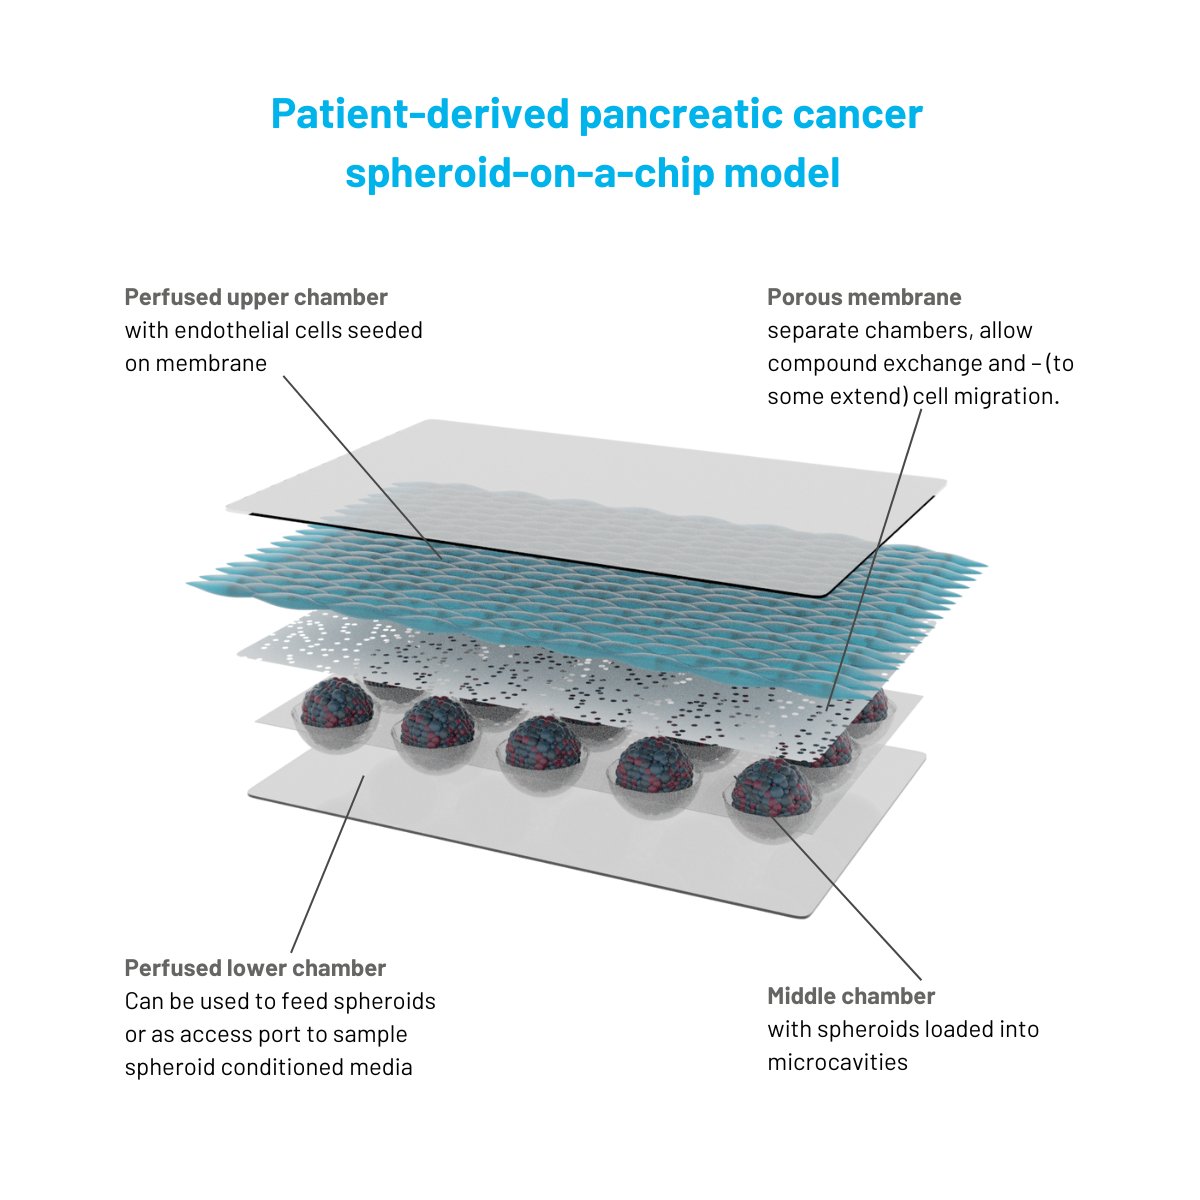 Advancing cancer immunotherapy requires realistic tumor microenvironment  models. Dynamic42's personalized pancreatic cancer spheroid-on-a-chip  models incorporate patient-derived TME, ensuring immunocompetence for  robust therapeutic screening. #CancerResearch #Immunotherapy